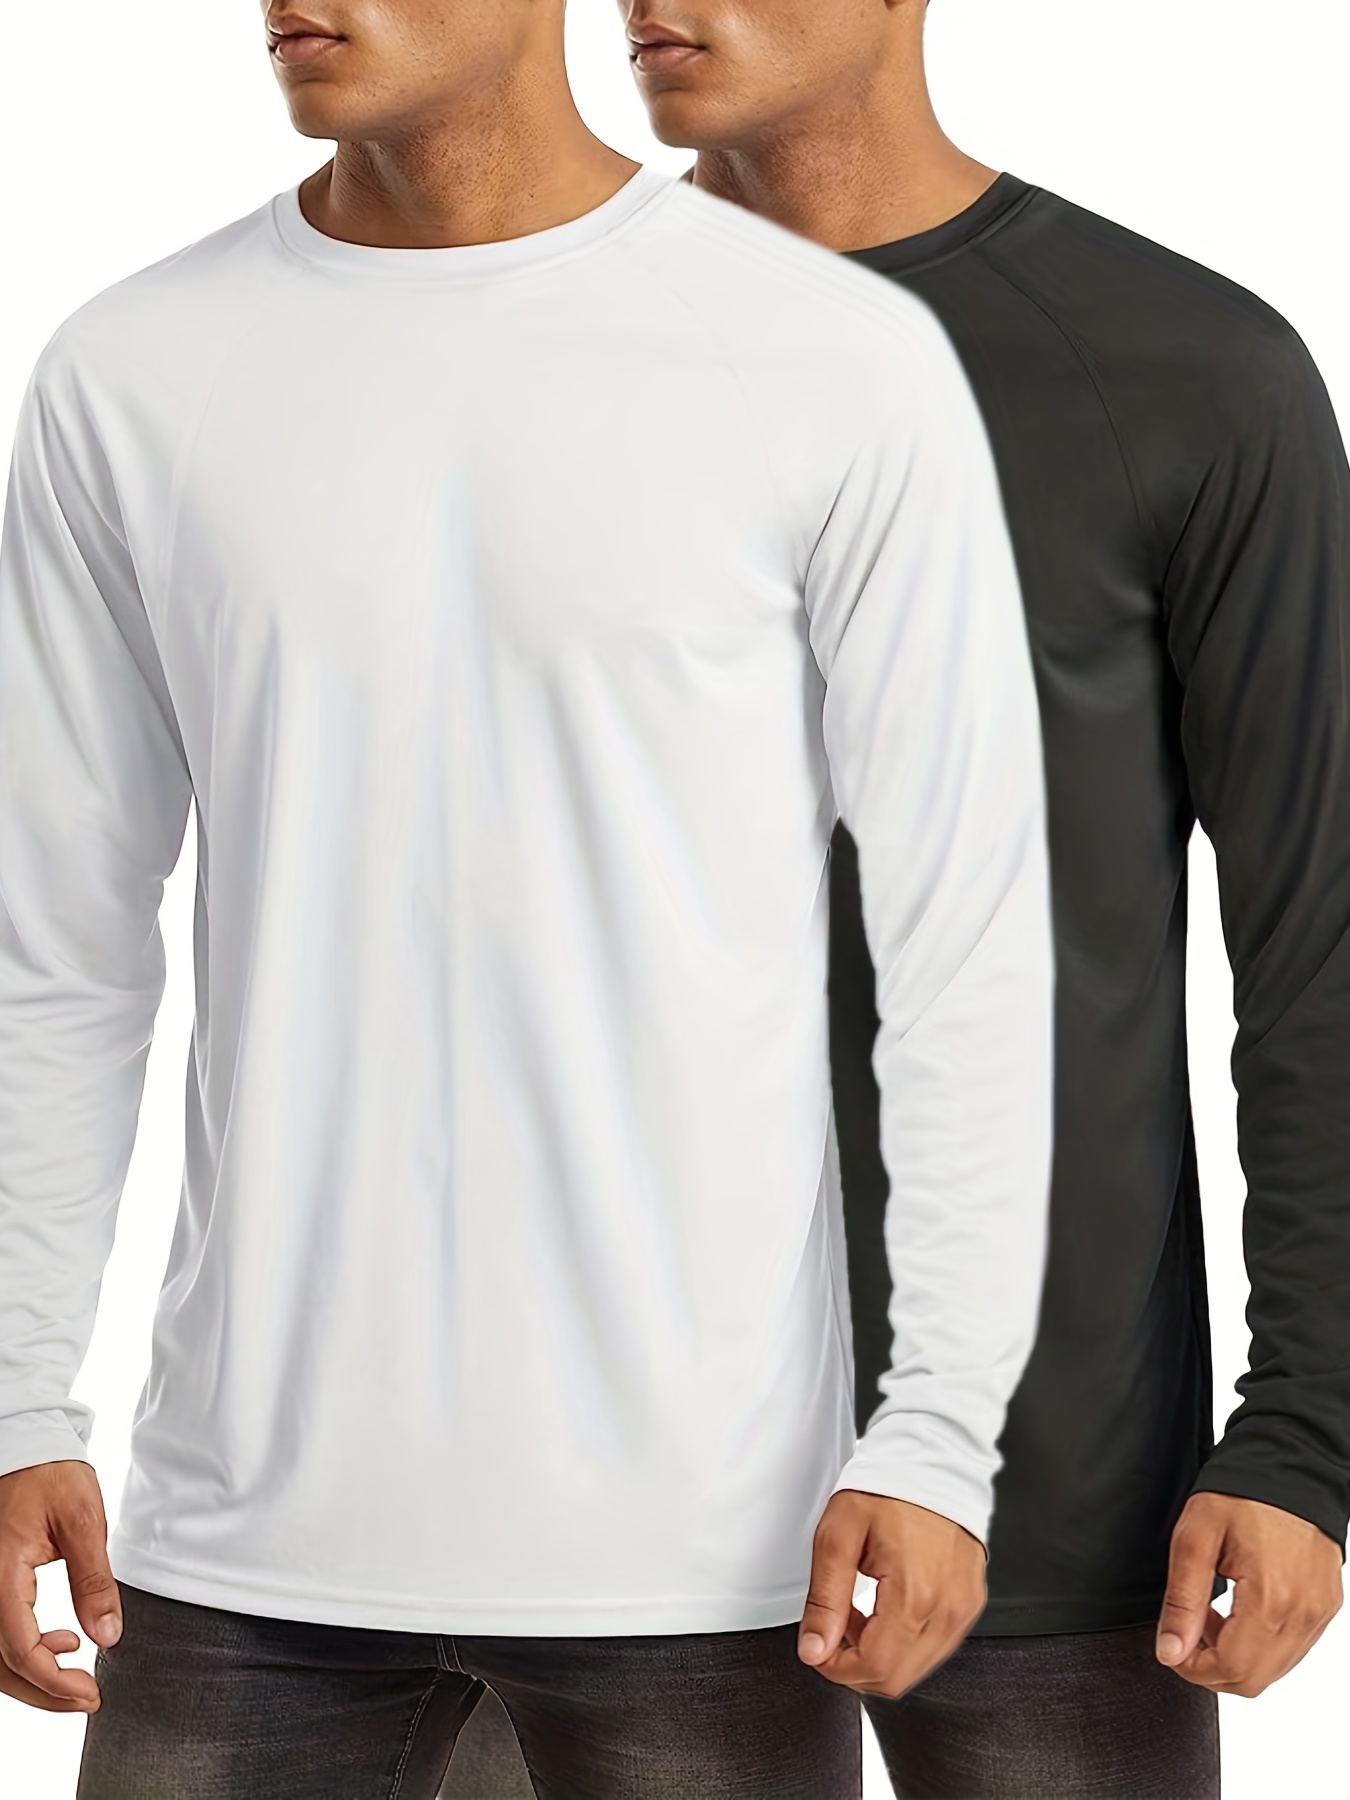 2 Pcs, Men's UPF 50+ Sun Protection T-Shirts, Long Sleeve Comfy Quick Dry Tops for Men's Outdoor Fishing Activities,Temu